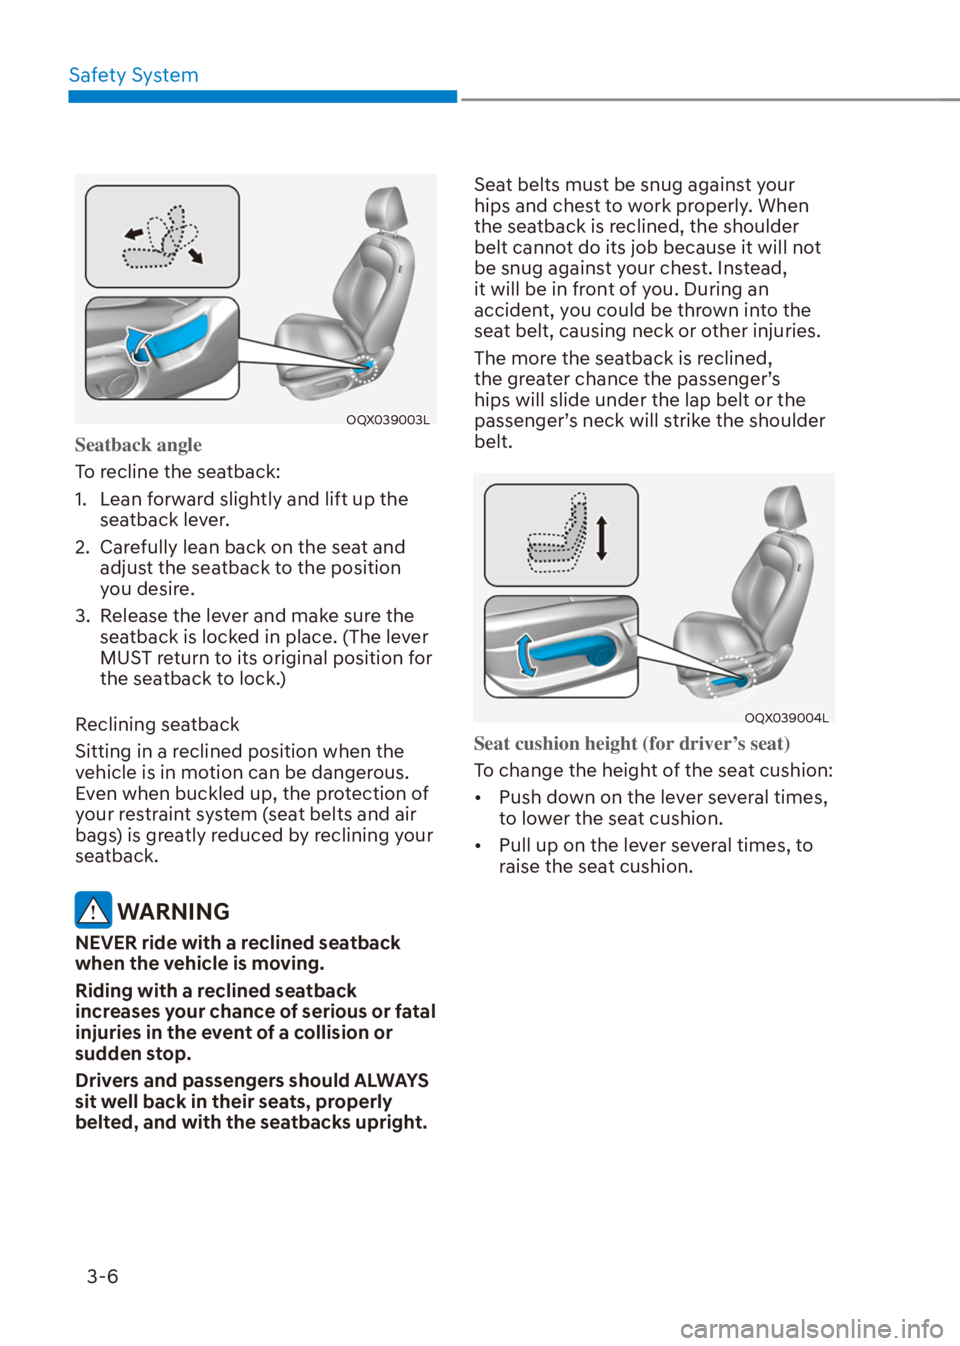 HYUNDAI VENUE 2022 Owners Guide Safety System
3-6
OQX039003L
Seatback angle
To recline the seatback:
1.  Lean forward slightly and lift up the 
seatback lever.
2.  Carefully lean back on the seat and 
adjust the seatback to the posi